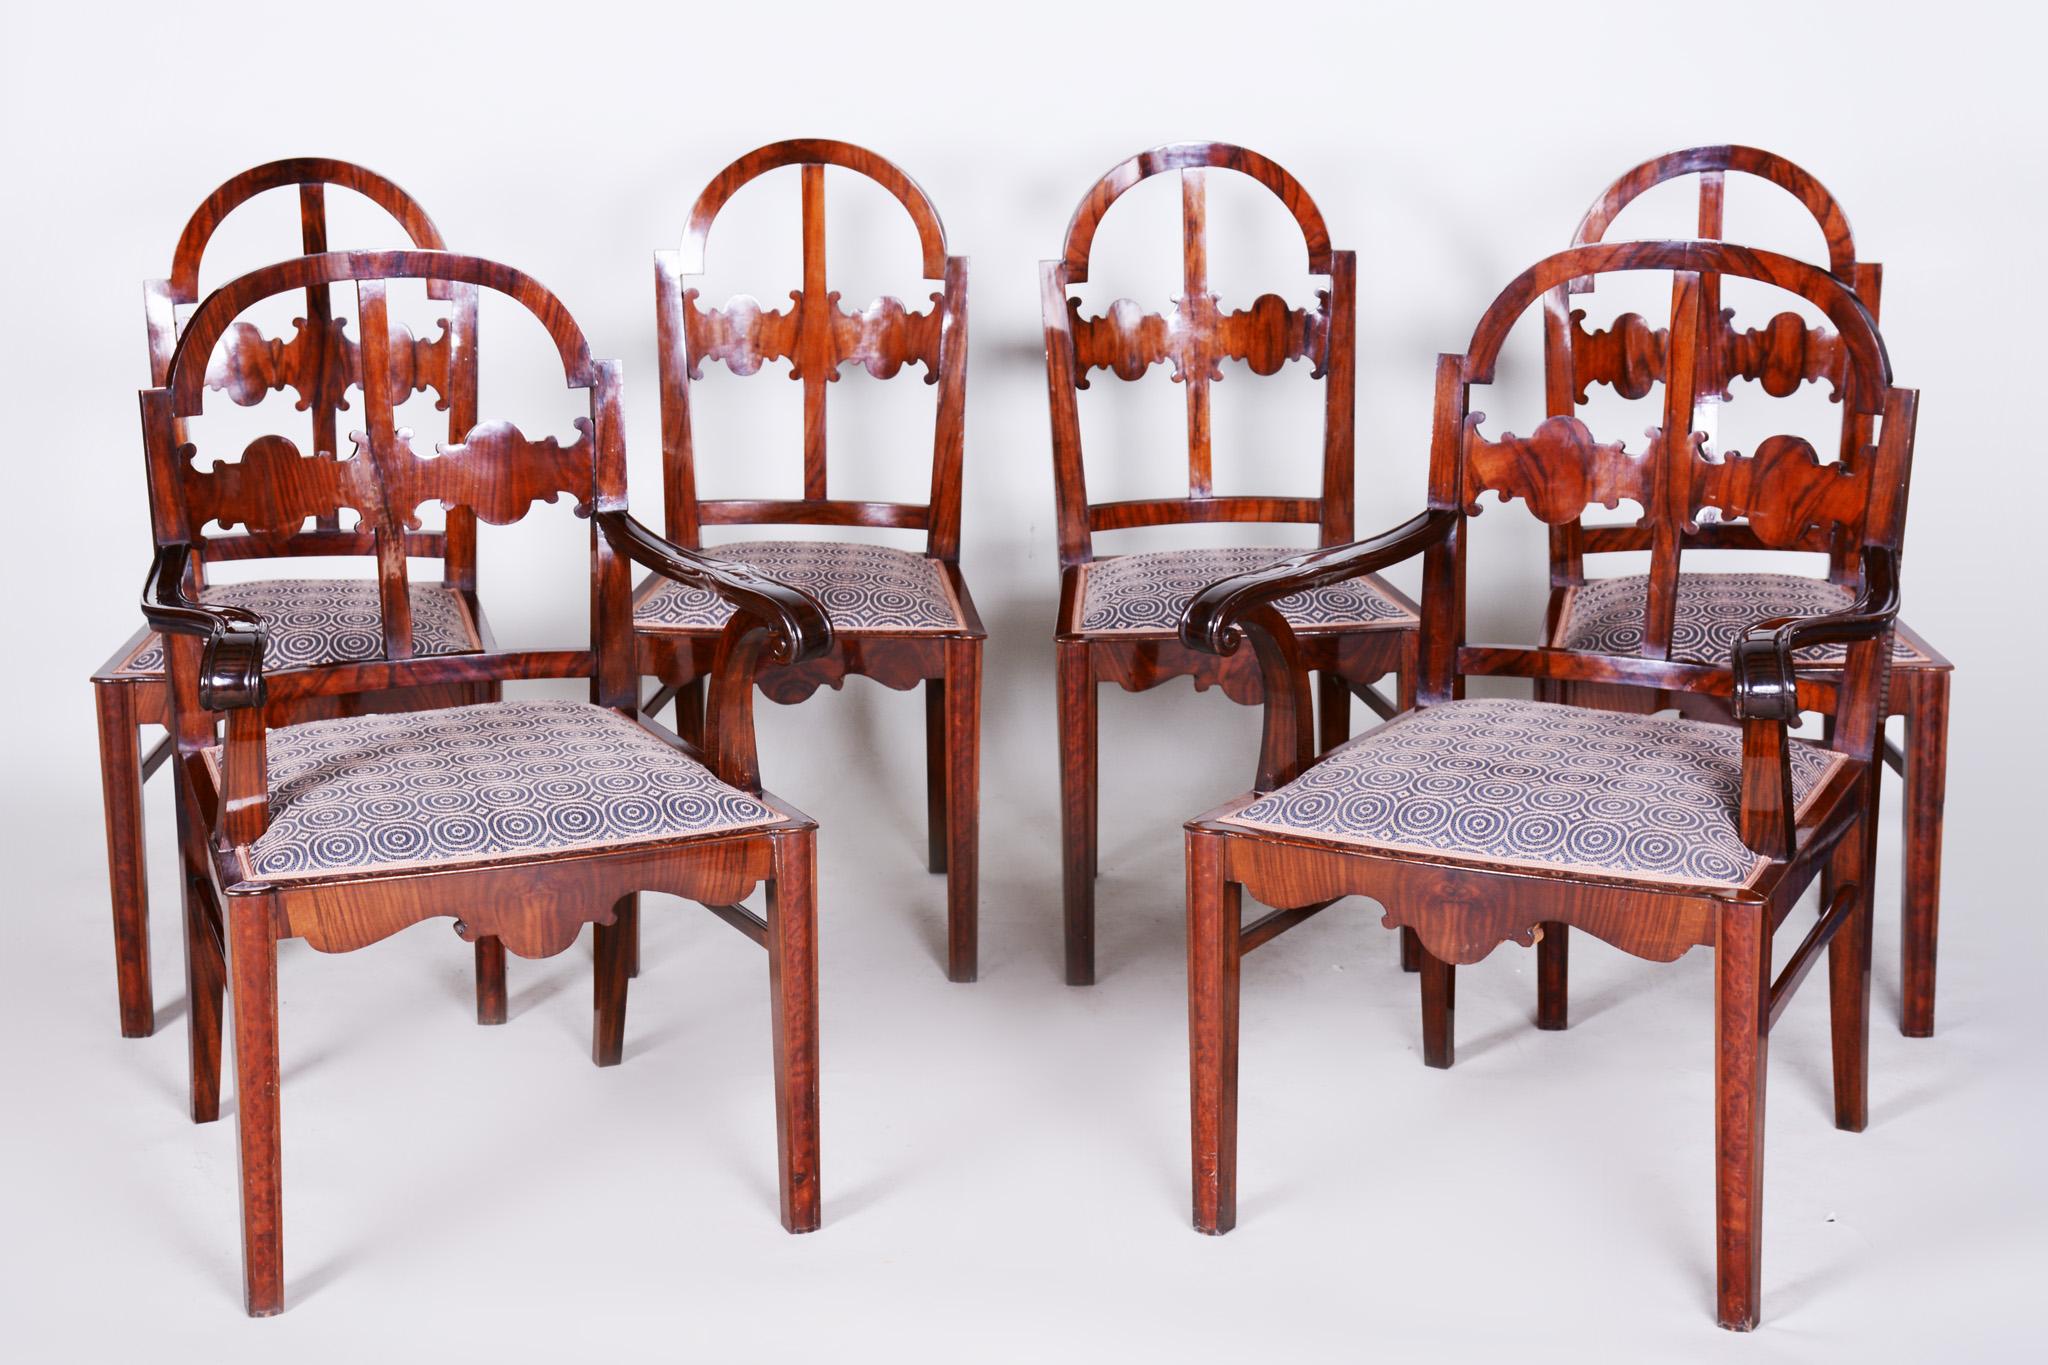 Czech Walnut Art Deco Seating Set, 2 Armchairs and 4 Chairs, Shellac Polish, 1920s For Sale